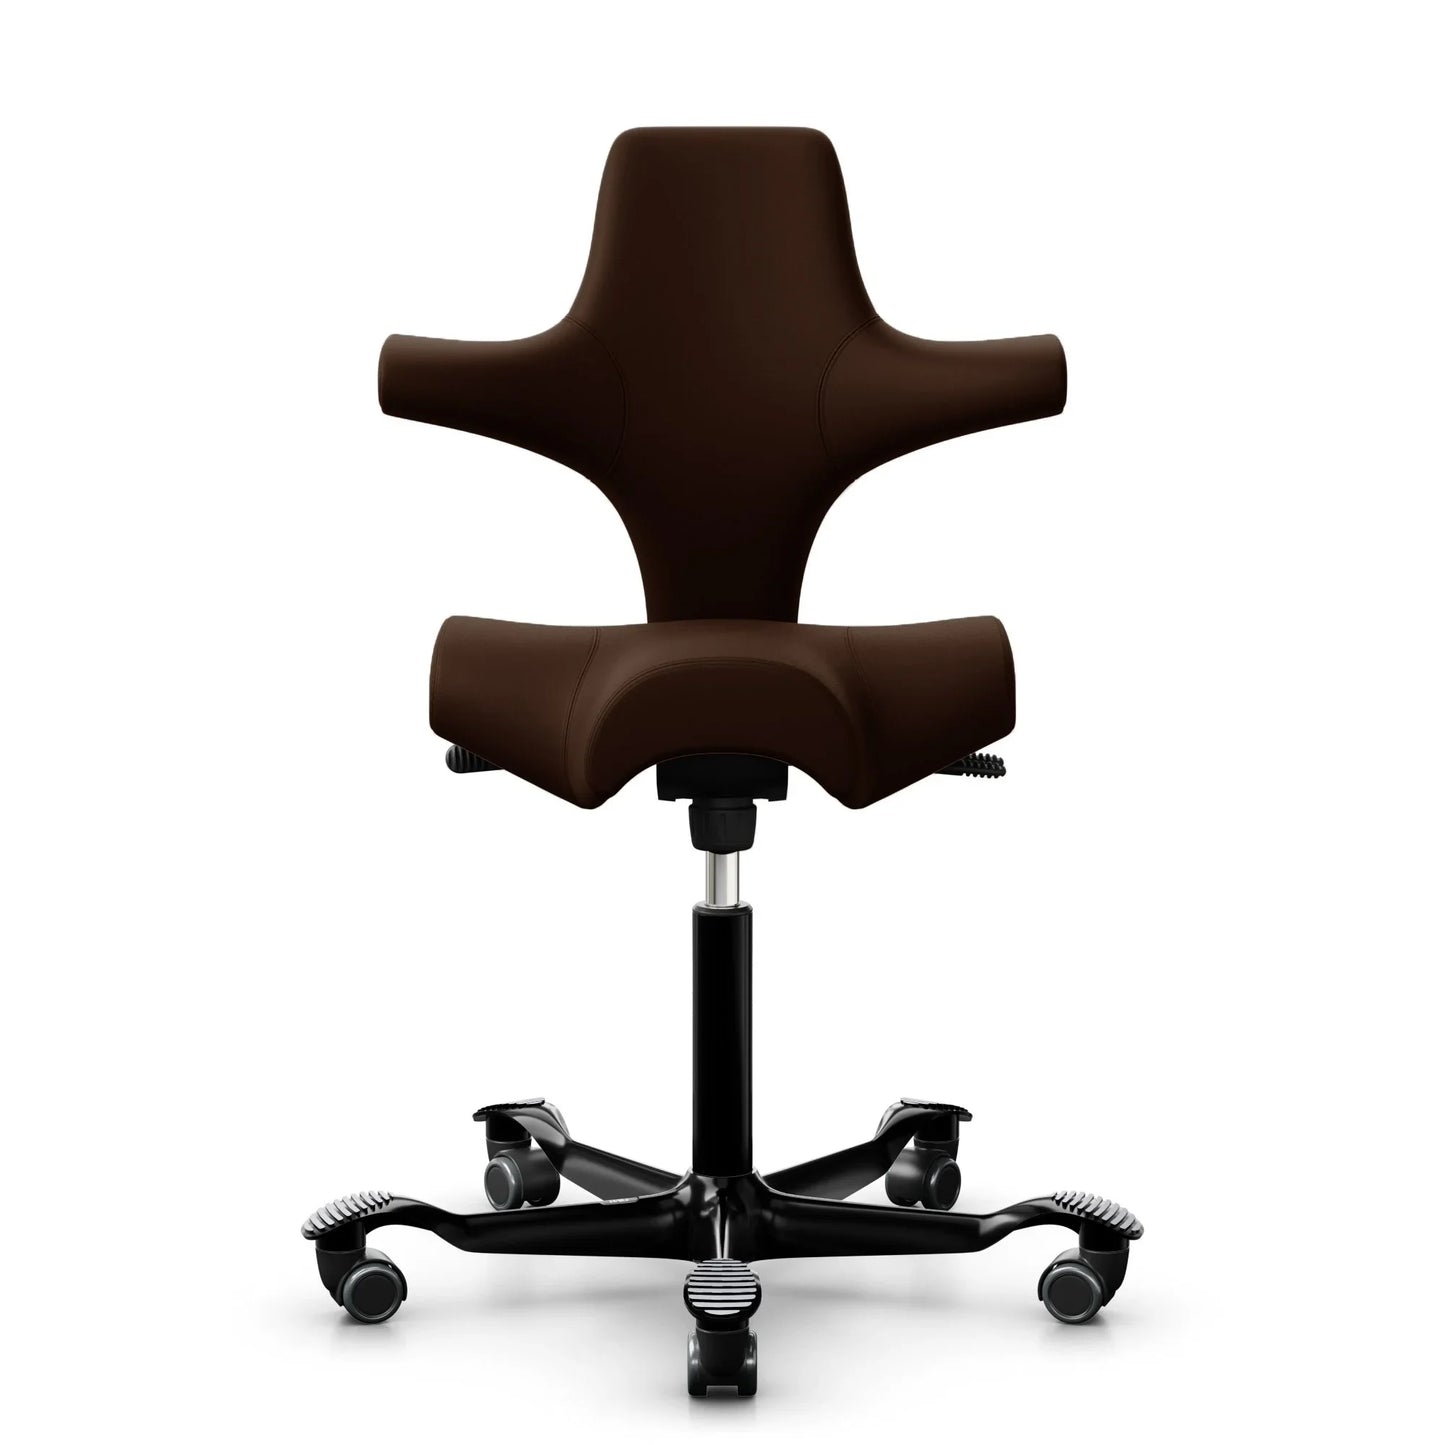 HAG Capisco Saddle Chair w/ Medical Grade Covering